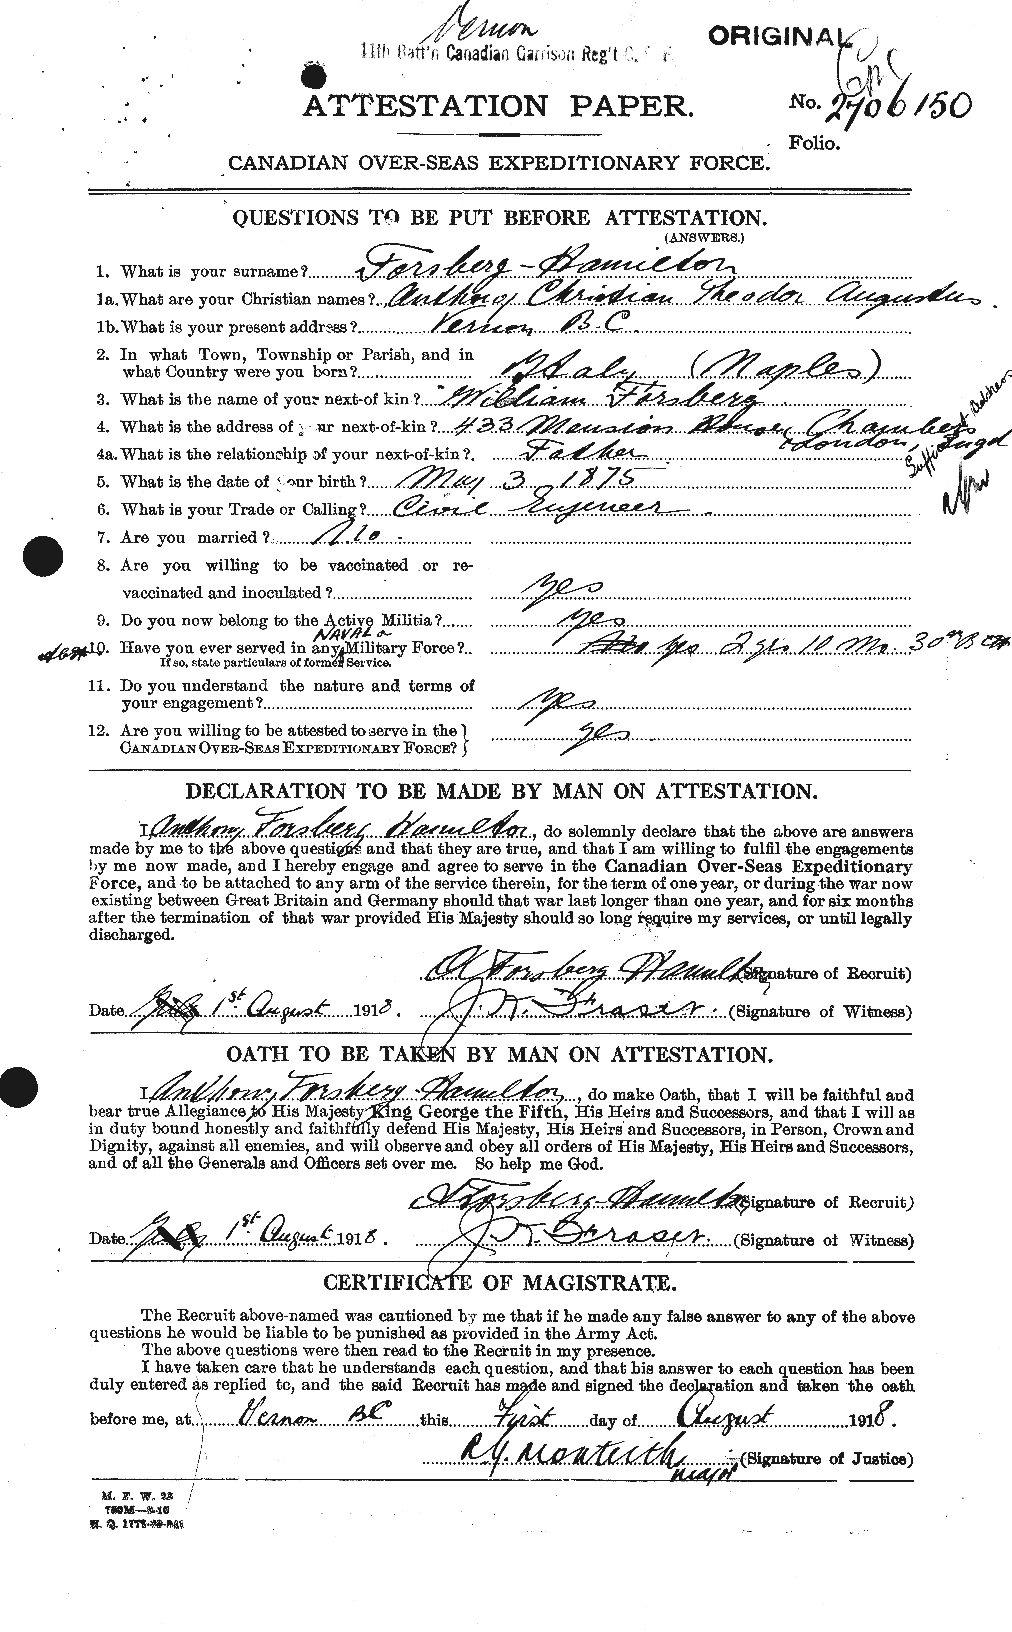 Personnel Records of the First World War - CEF 329636a